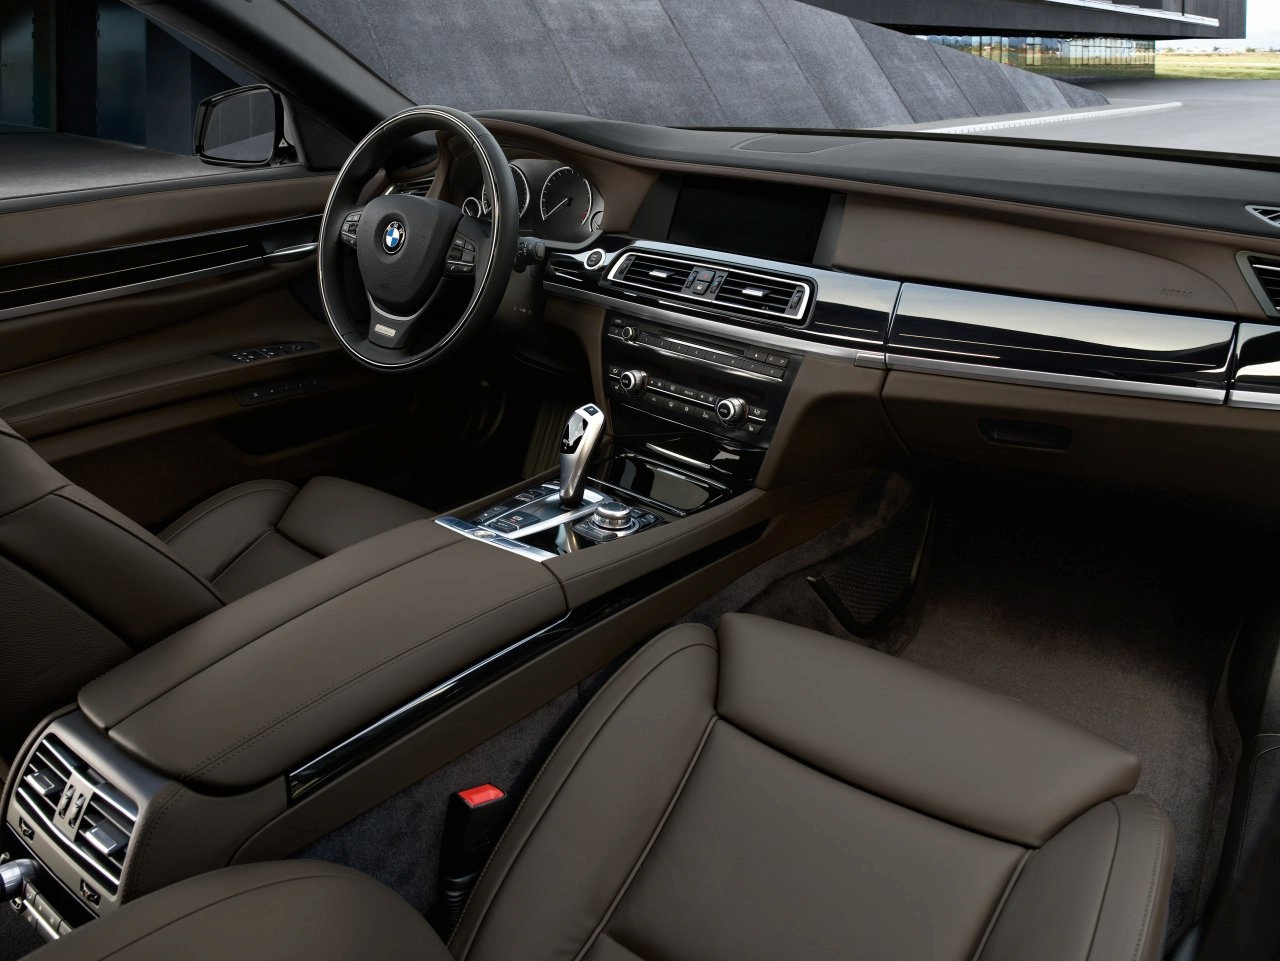 BMW 7 SERIES WALLPAPERS